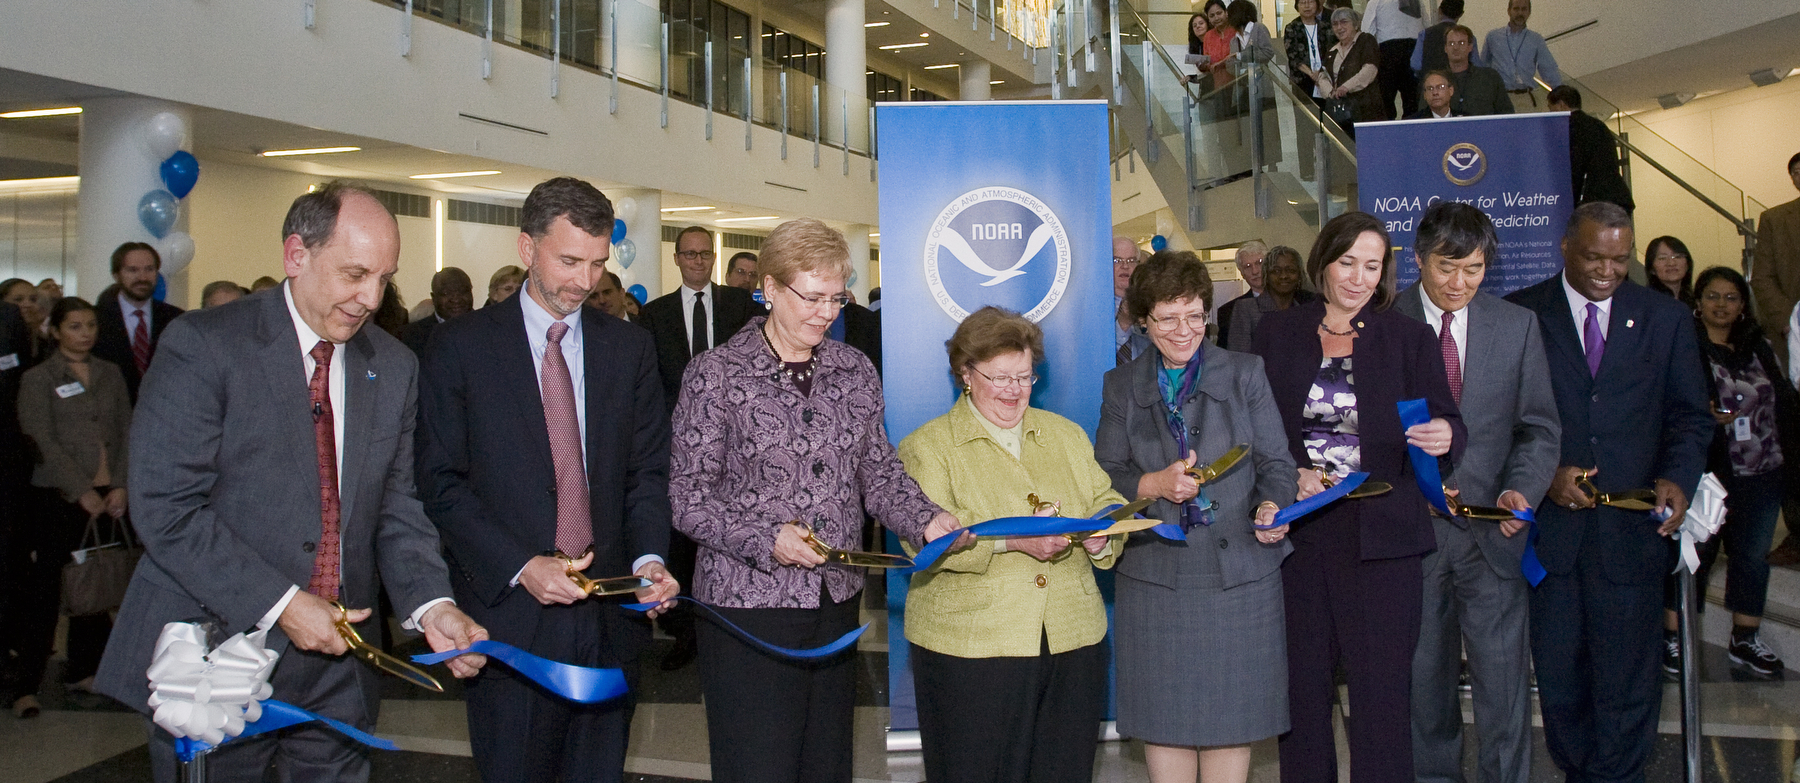 Senator Mikulski participated in a ribbon cutting to open the new NOAA Center for Weather and Climate Prediction in College Park.